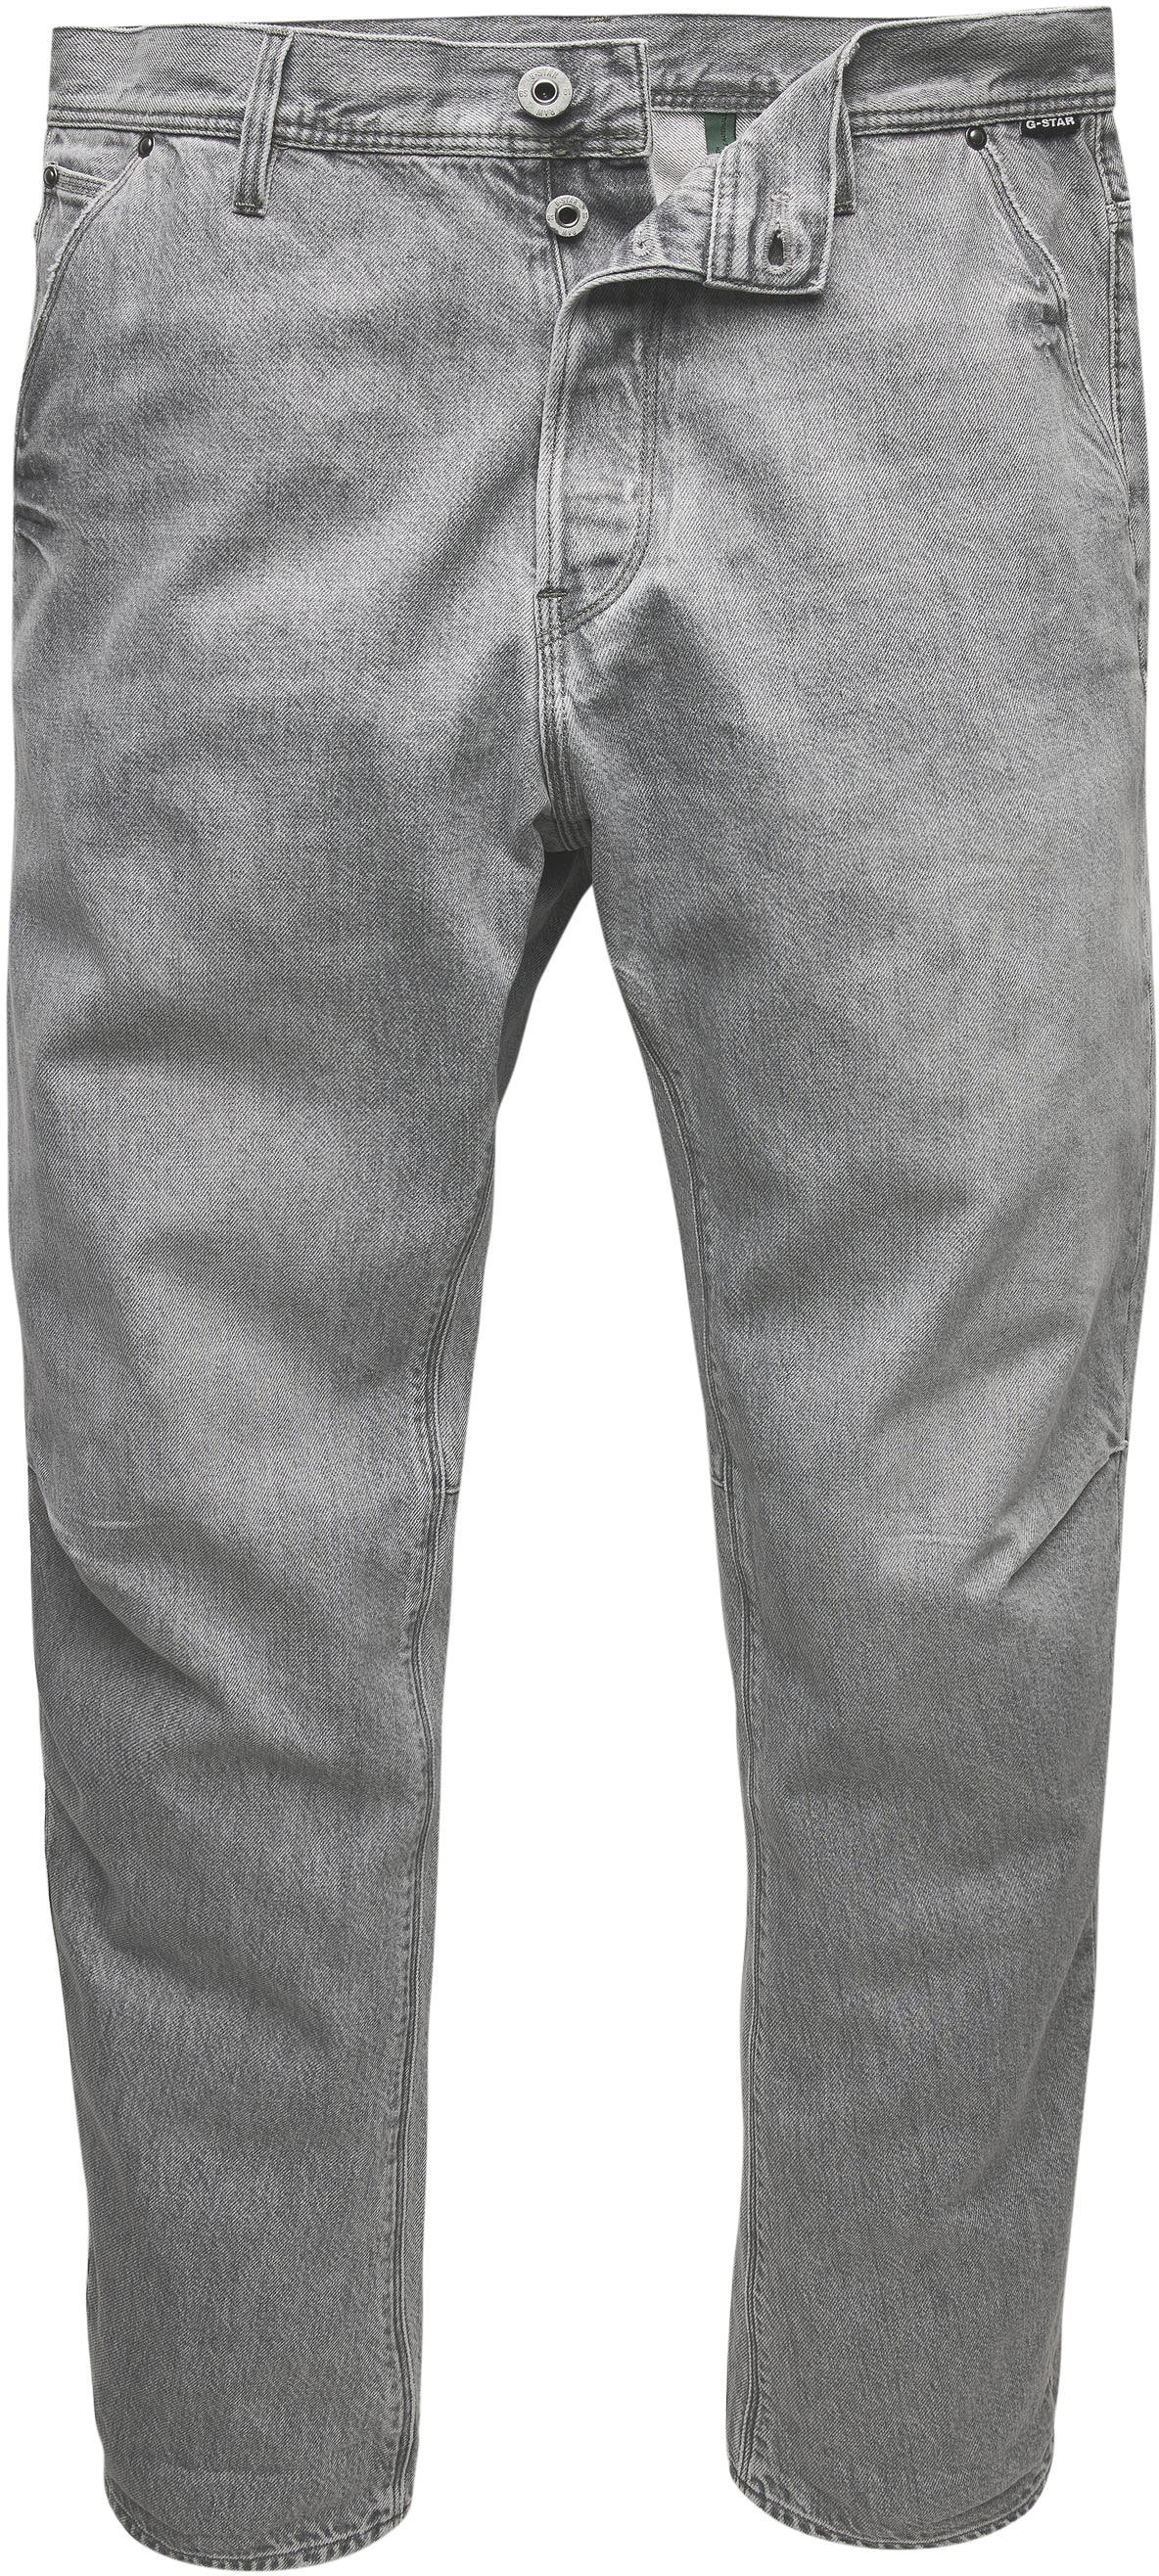 OTTO RAW 3d« »Relaxed bestellen online Grip G-Star Tapered-fit-Jeans Tapered bei